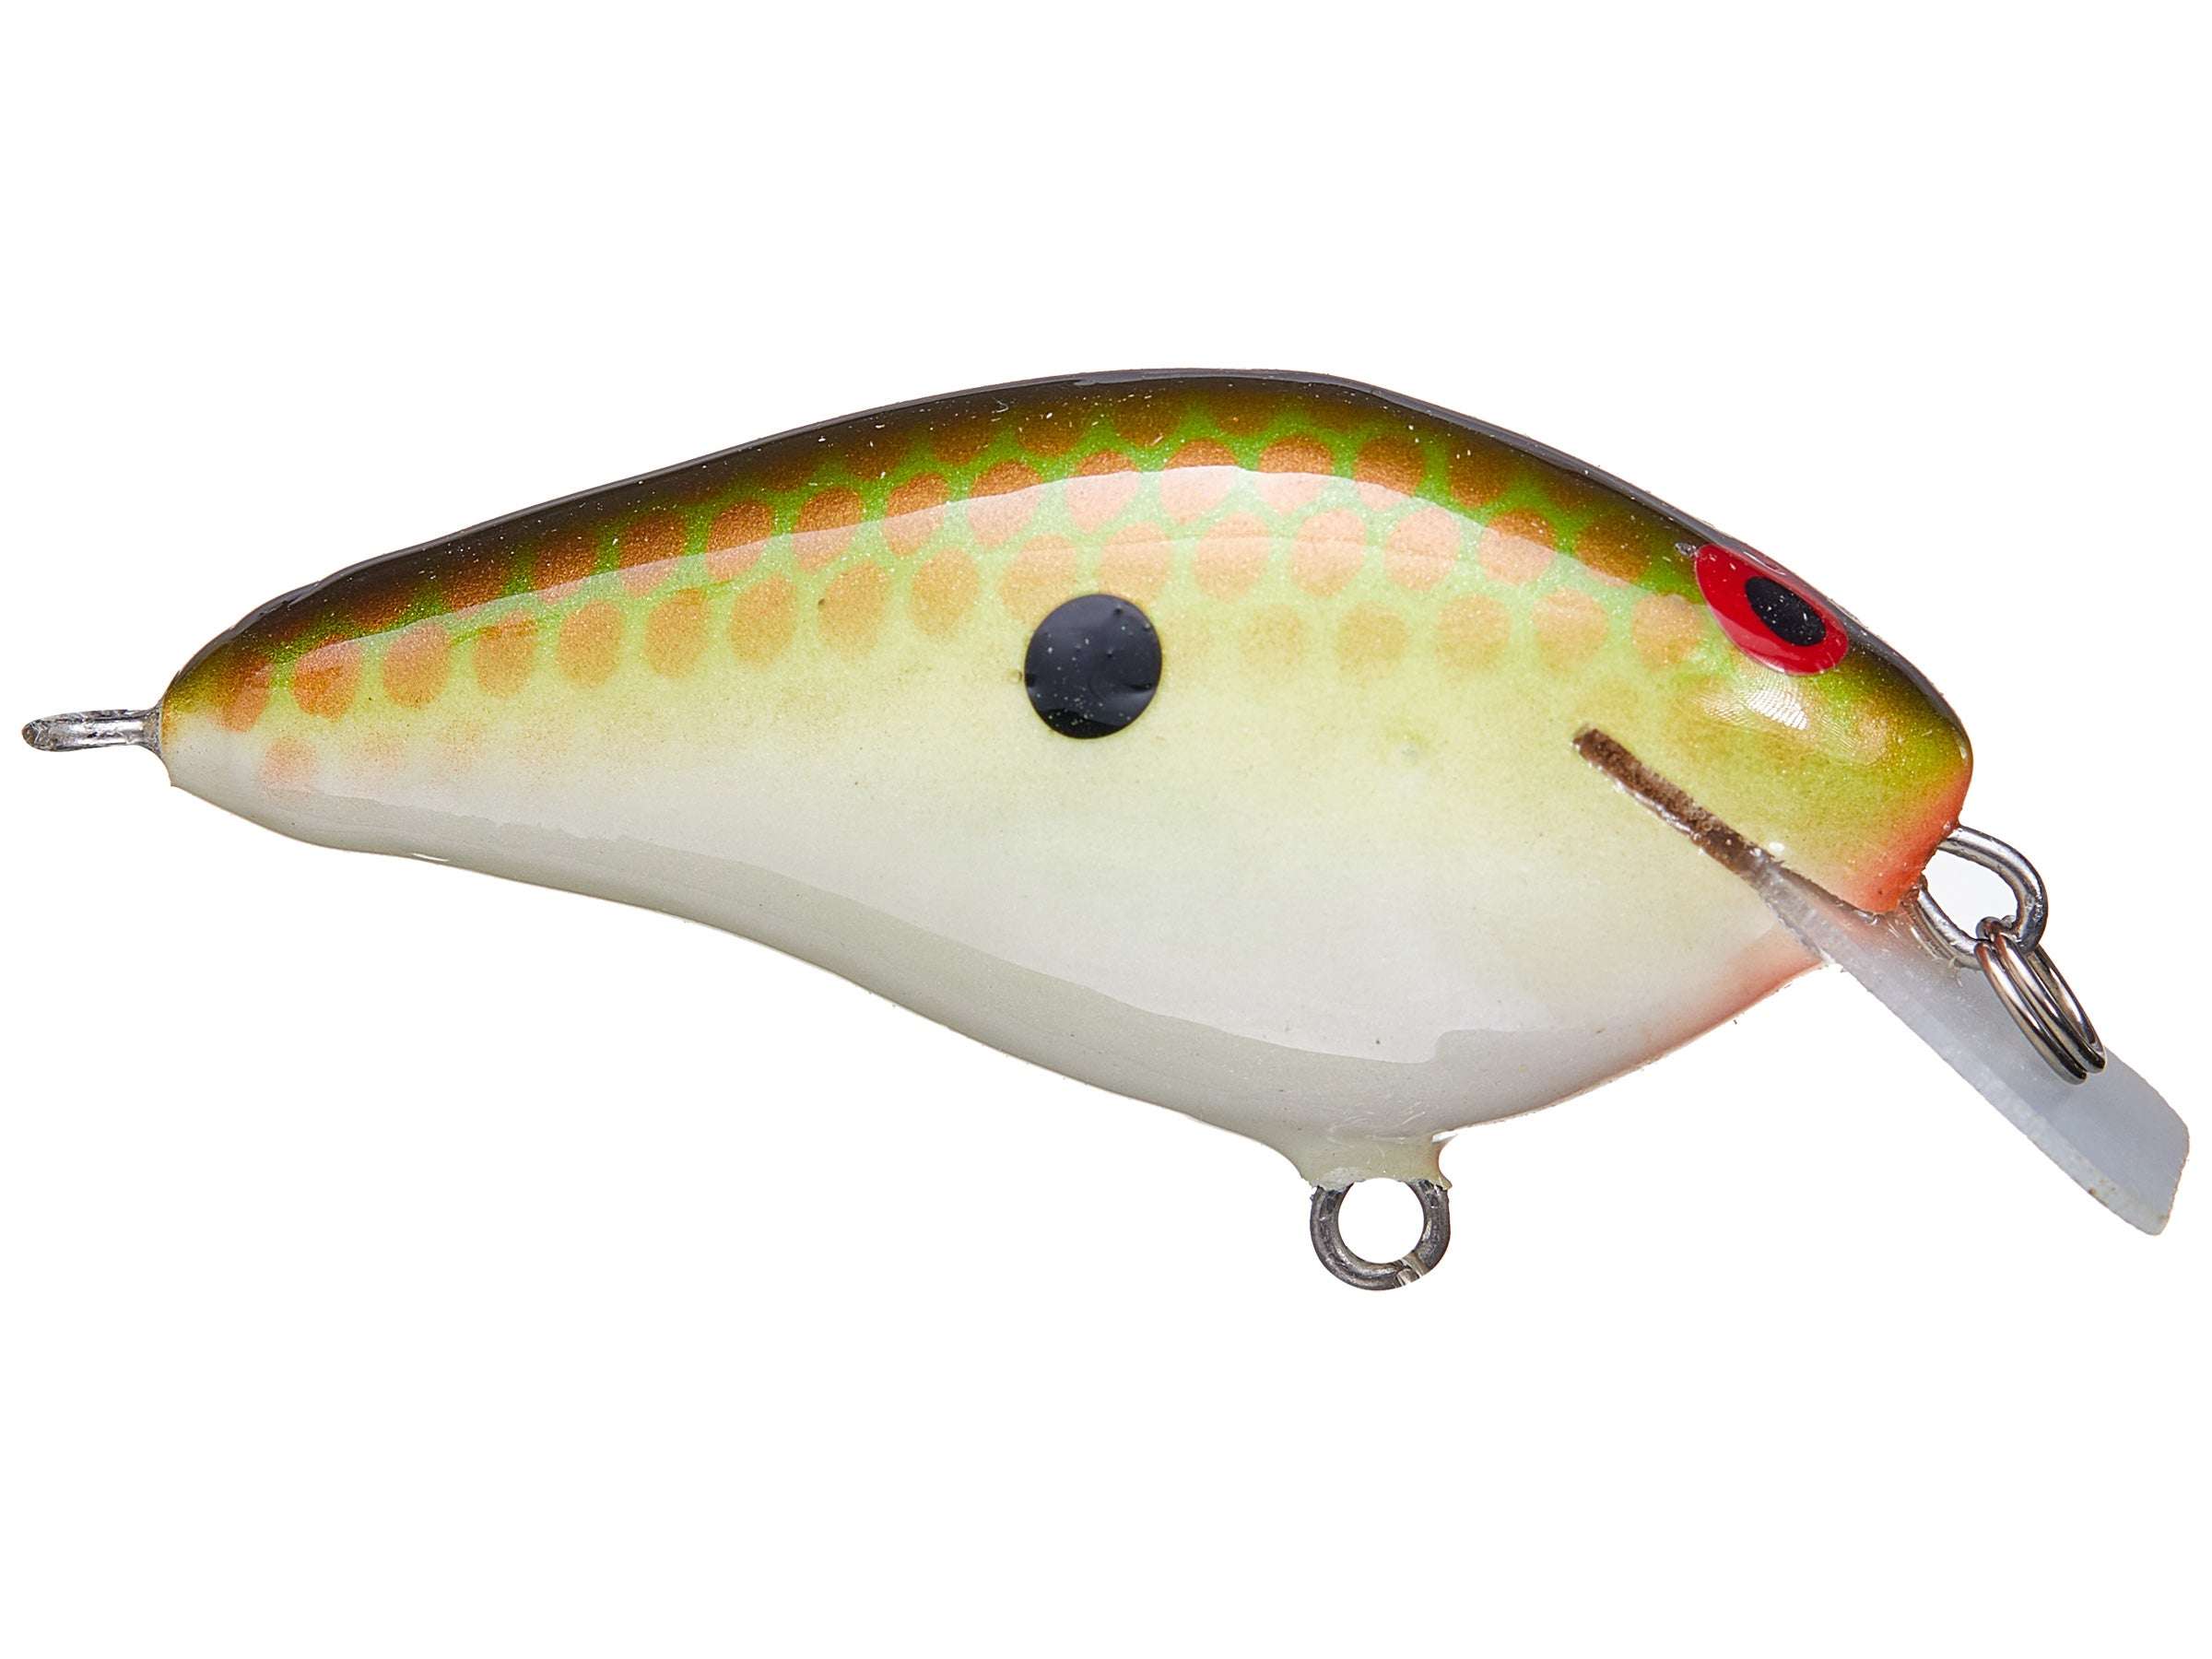 <p><strong>PH Customs PH 1.5 Squarebill Crankbait</strong><br> As the bass begin to transition into their fall patterns, a balsa squarebill is traditionally a great bait to have tied on. In 2021, Phil Hunt of PH Custom designed a more traditional, 1.5 style squarebill that comes equipped with a durable circuit board lip and high-end hardware. <a href=